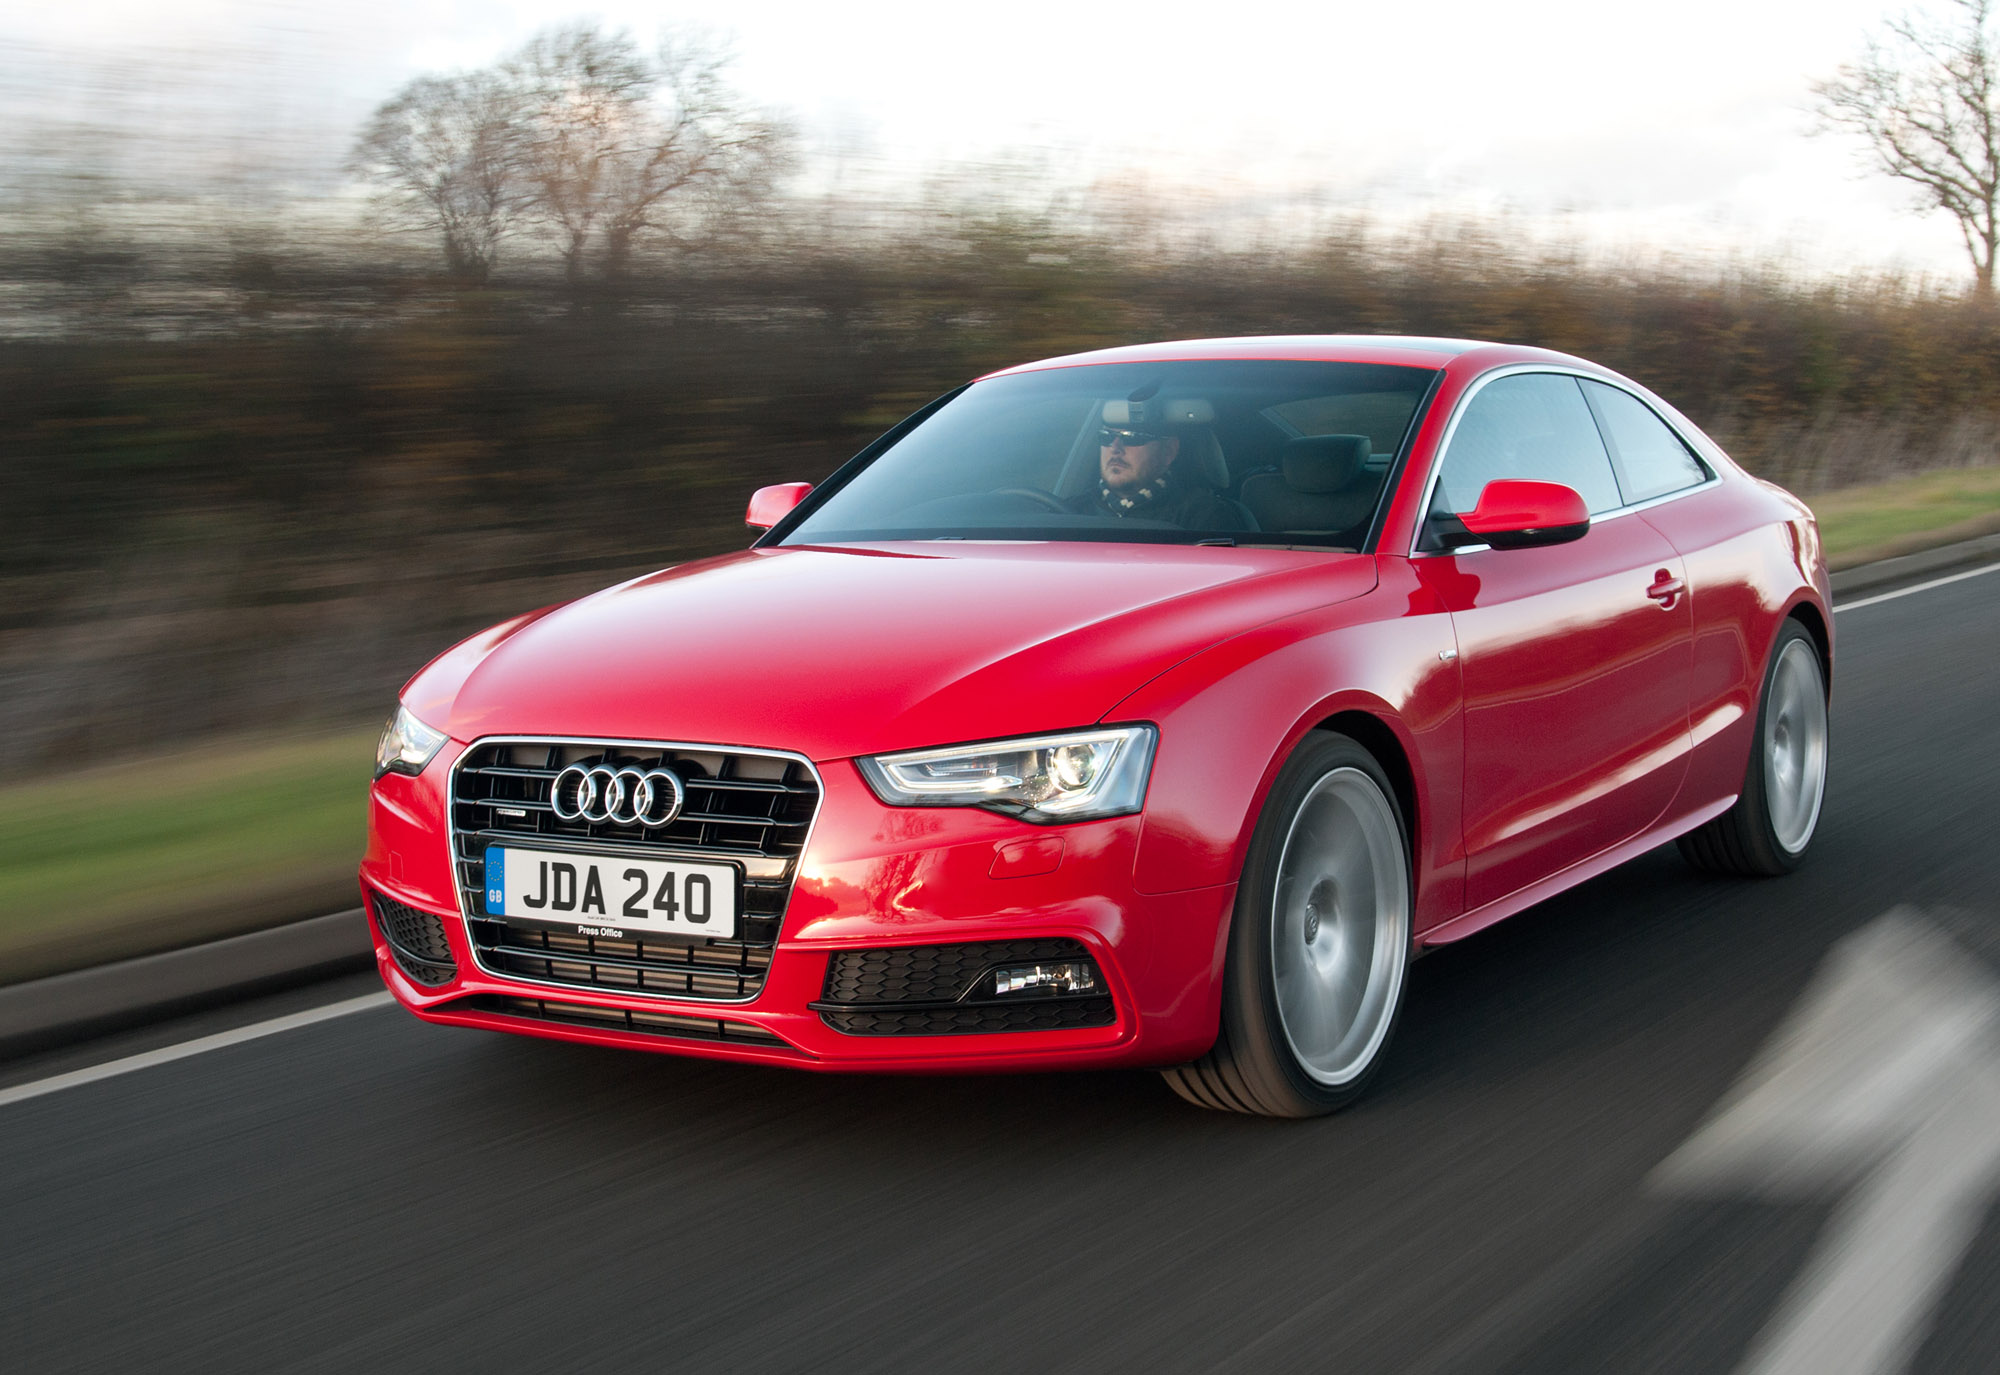 Audi A5 review - price, specs and 0-60 time | evo